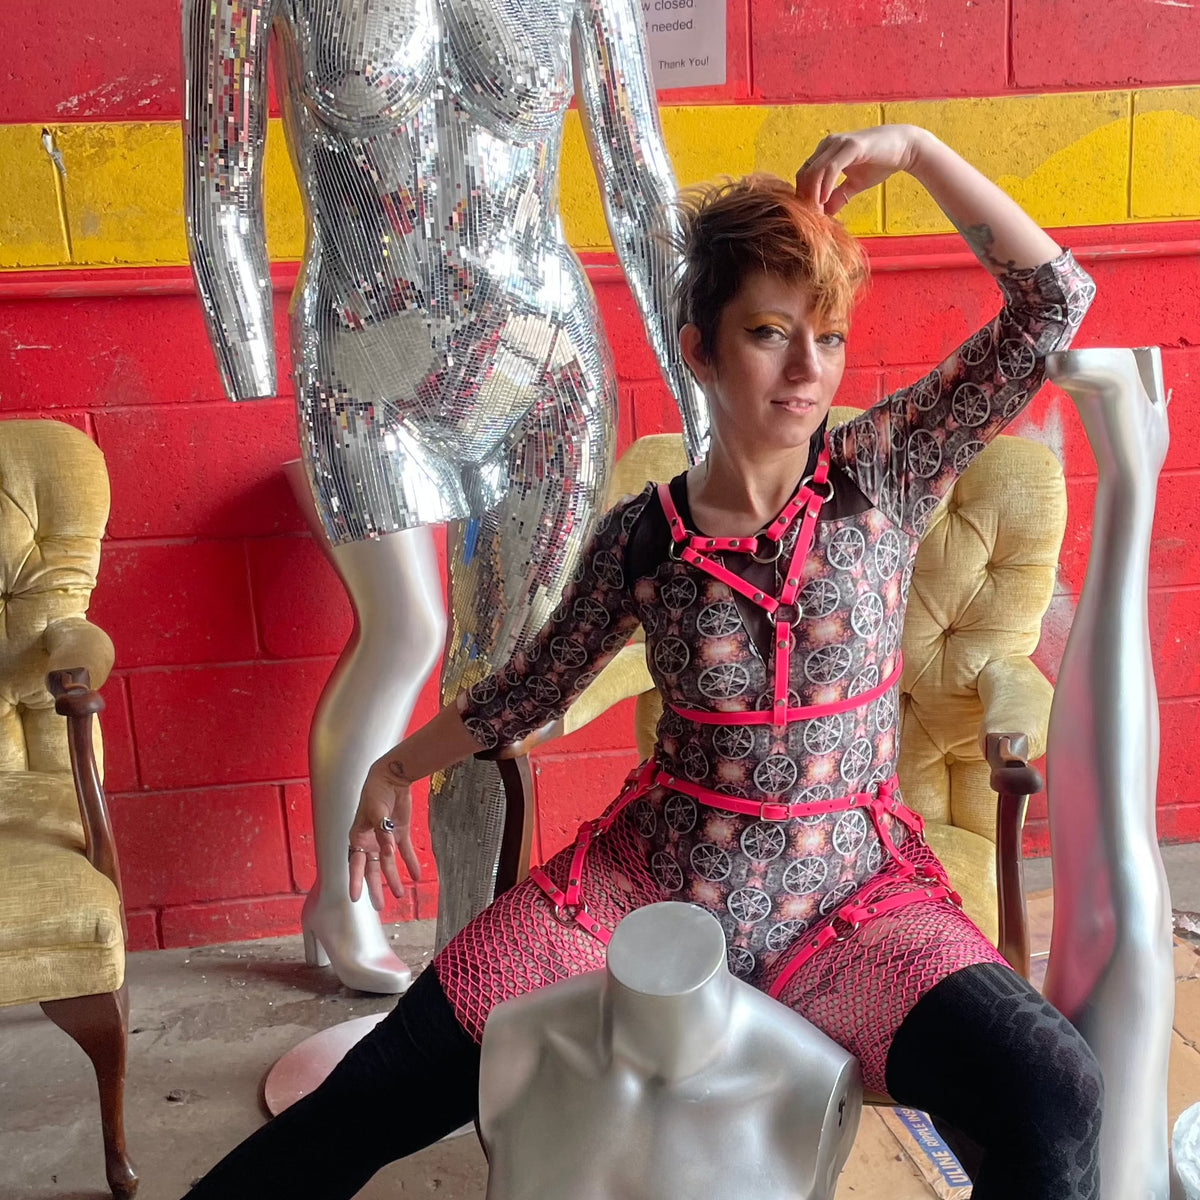 Woman in printed catsuit poses with mannequins in pink chest harness bra and thigh harness outfit.